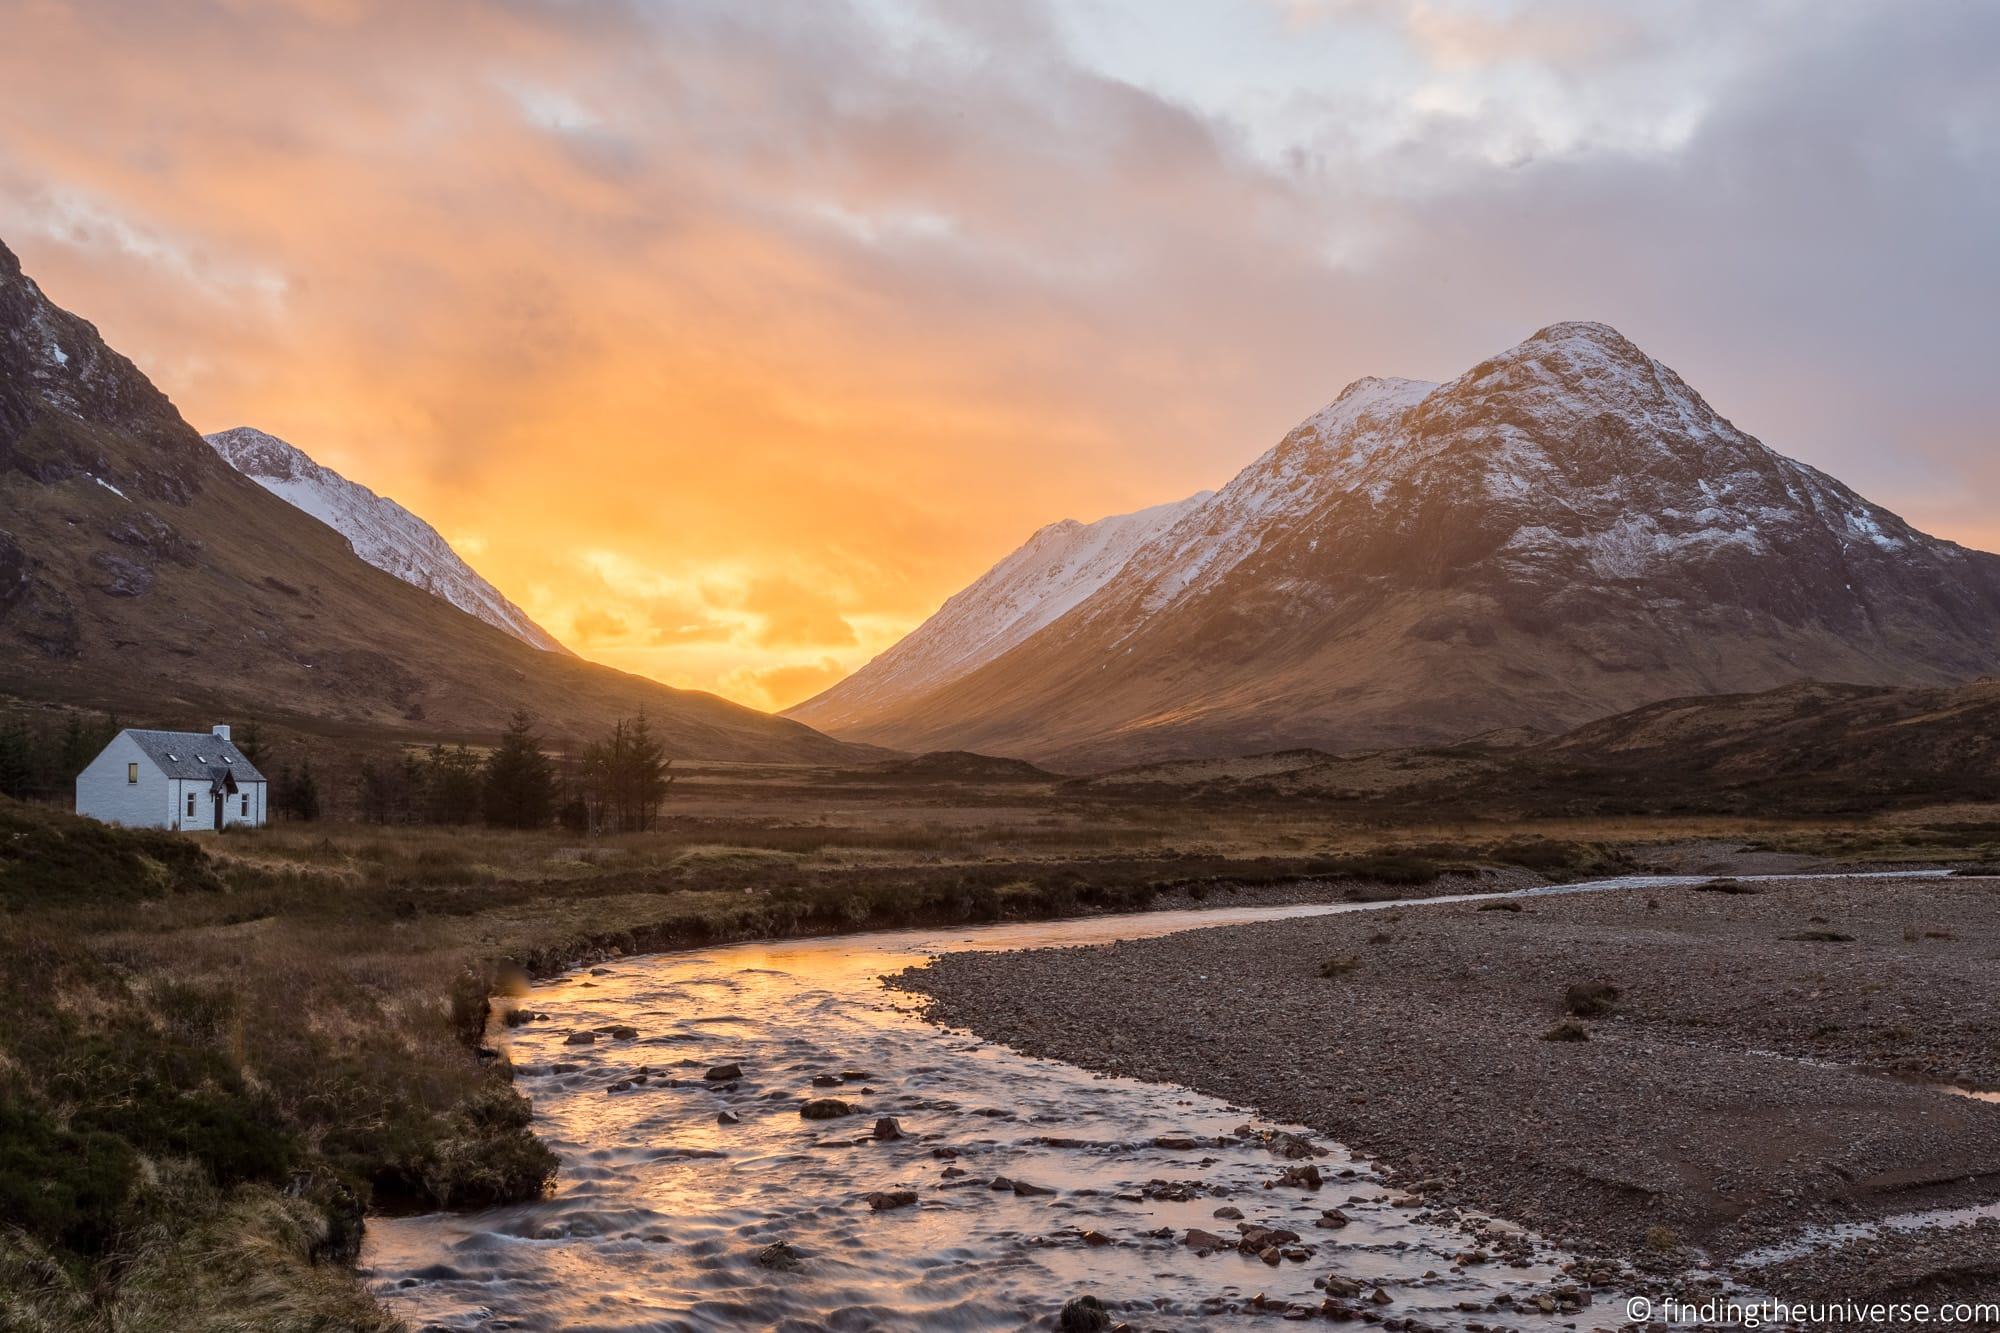 Glen Coe Scotland - A Complete Guide to Visiting - Finding the Universe